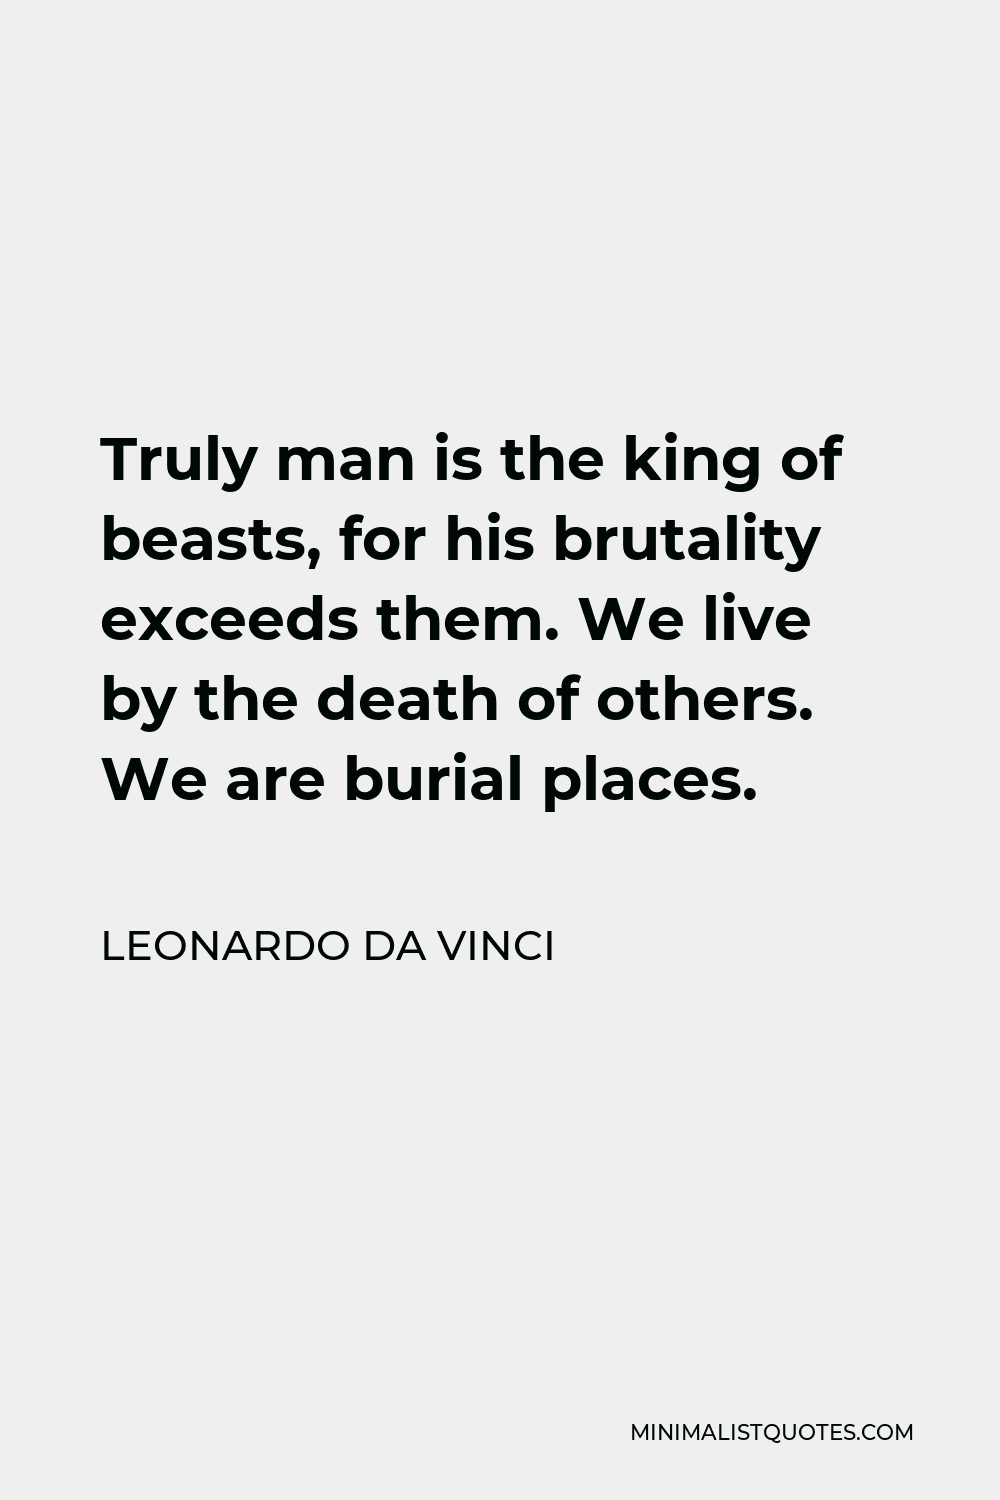 Leonardo da Vinci Quote - Truly man is the king of beasts, for his brutality exceeds them. We live by the death of others. We are burial places.